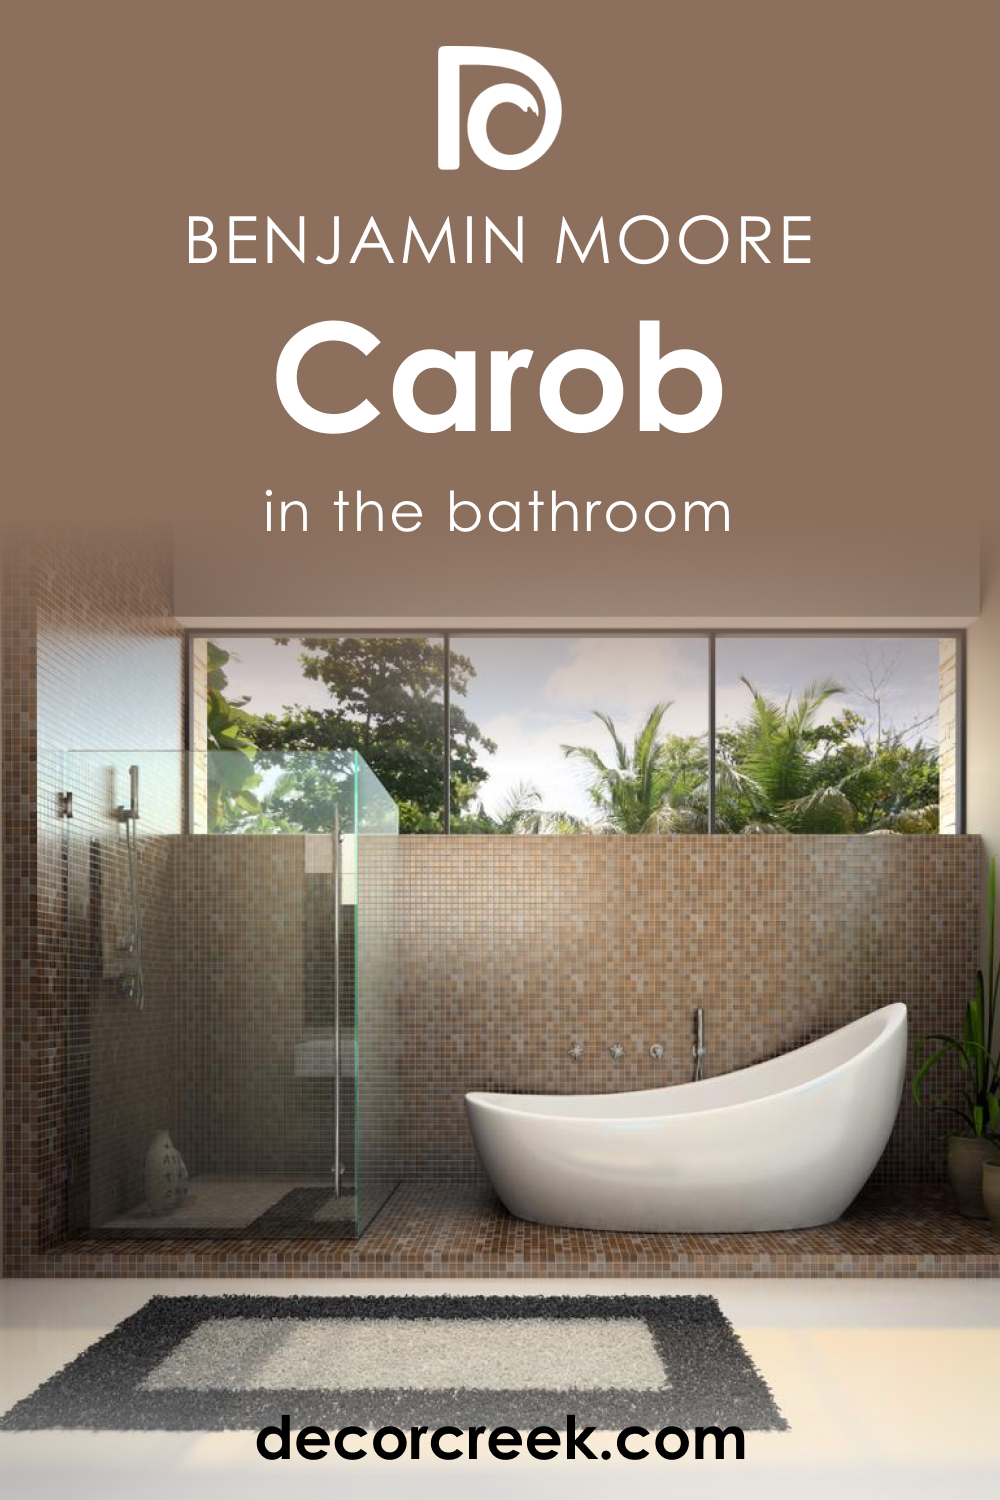 How to Use Carob AF-160 in the Bathroom?